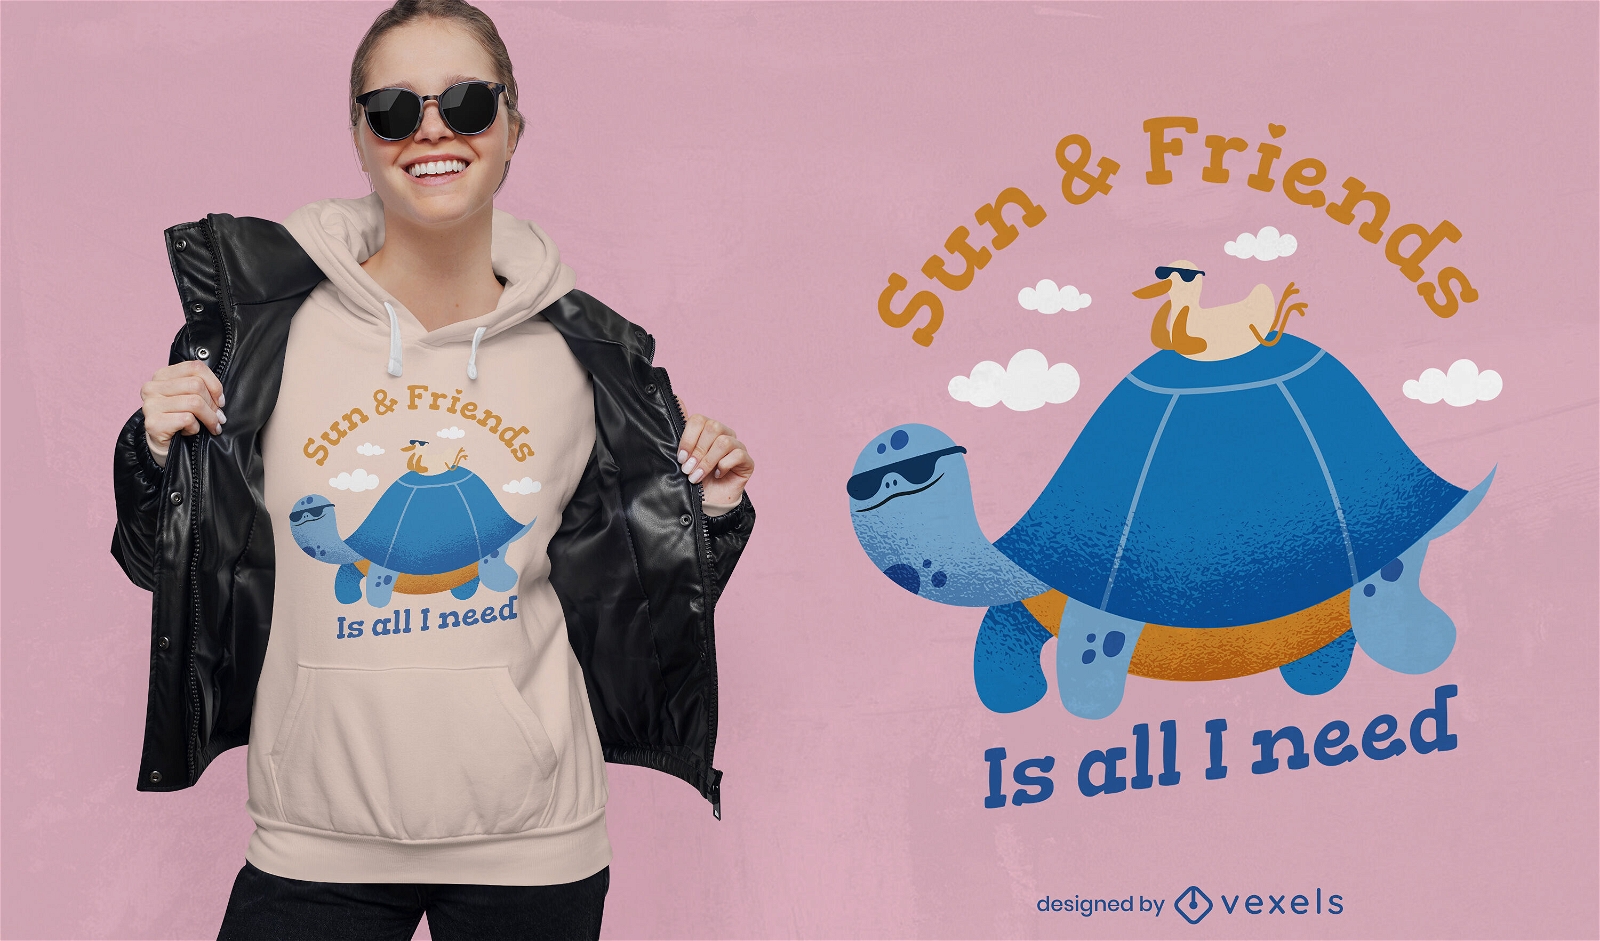 Friendly turtle and duck quote t-shirt design